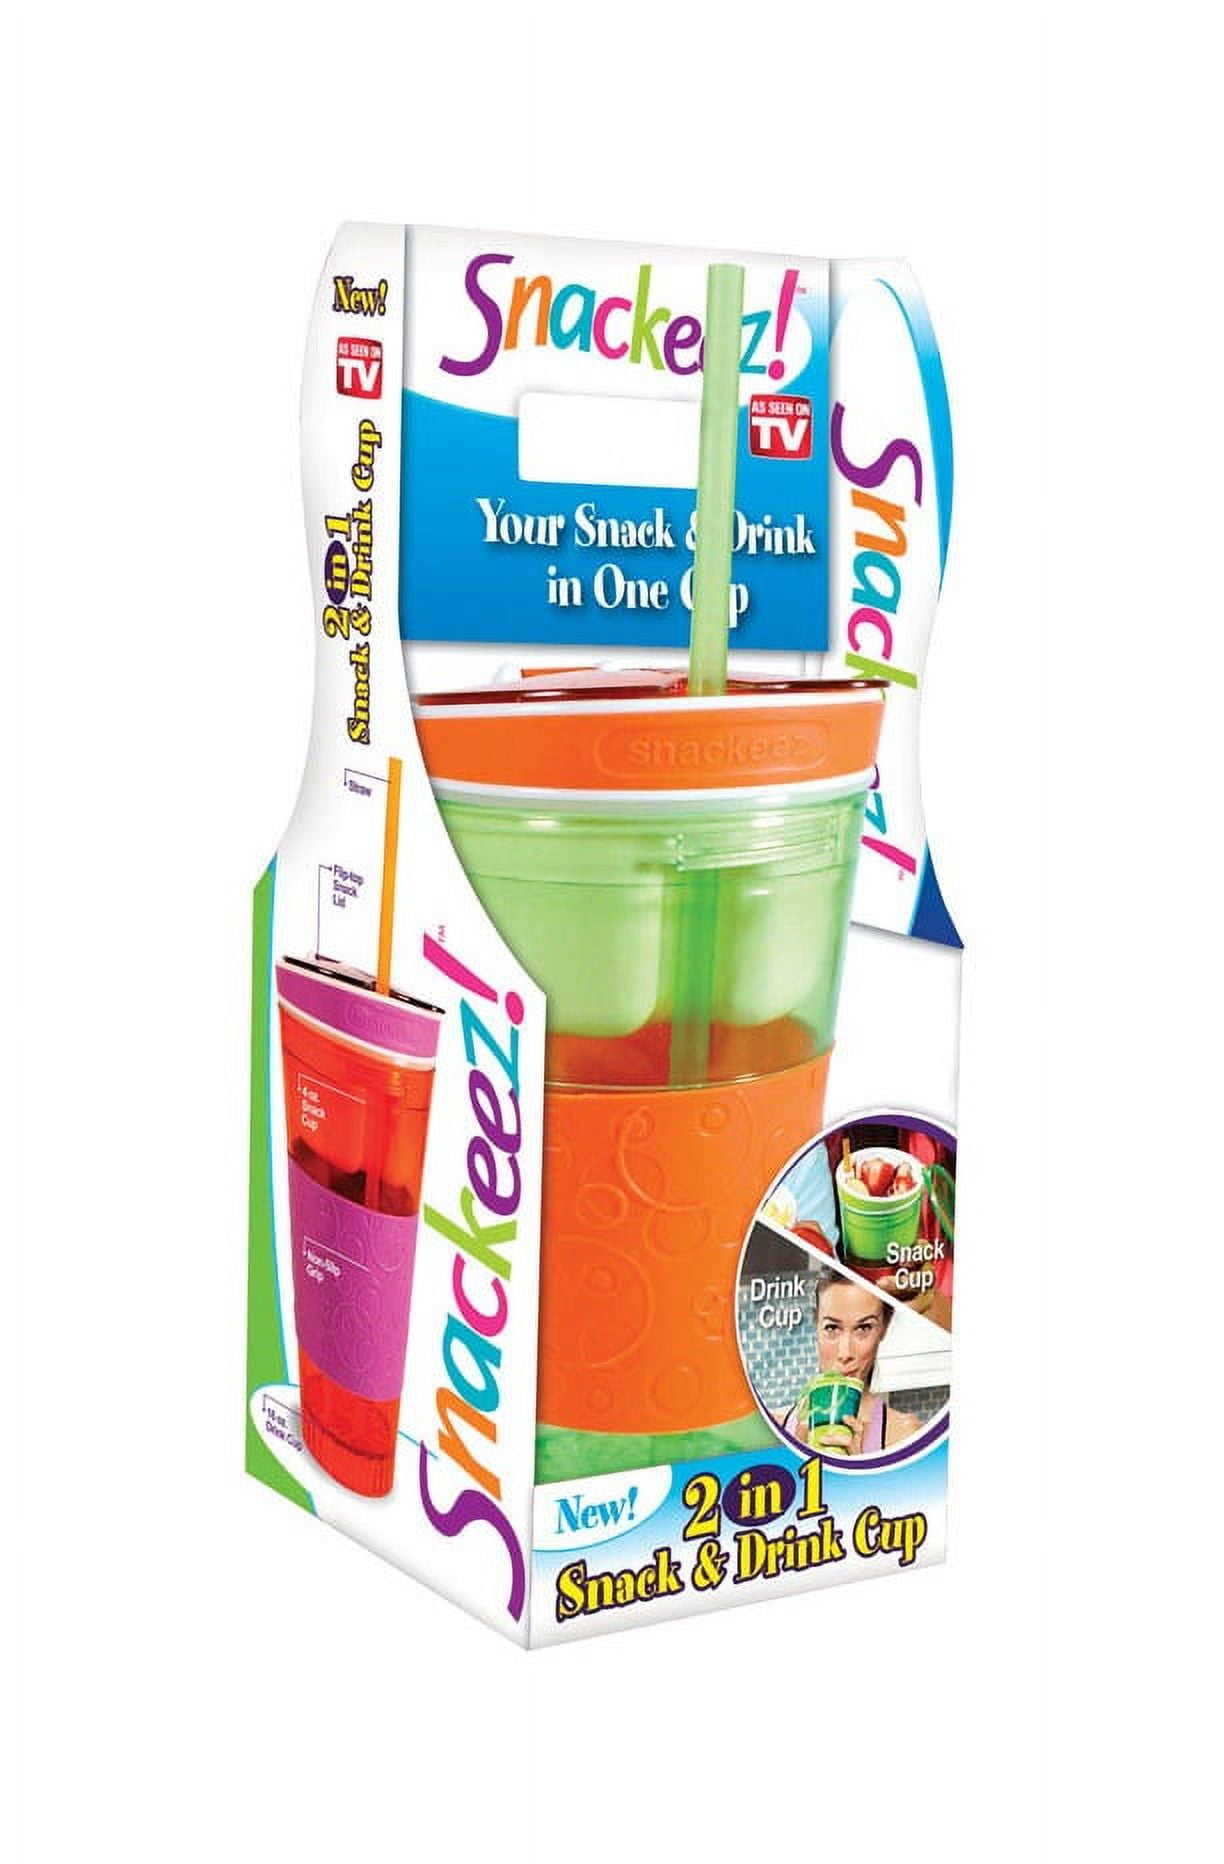 Snackeez 2 in 1 Snack & Drink in one Cup - New #PAC11147